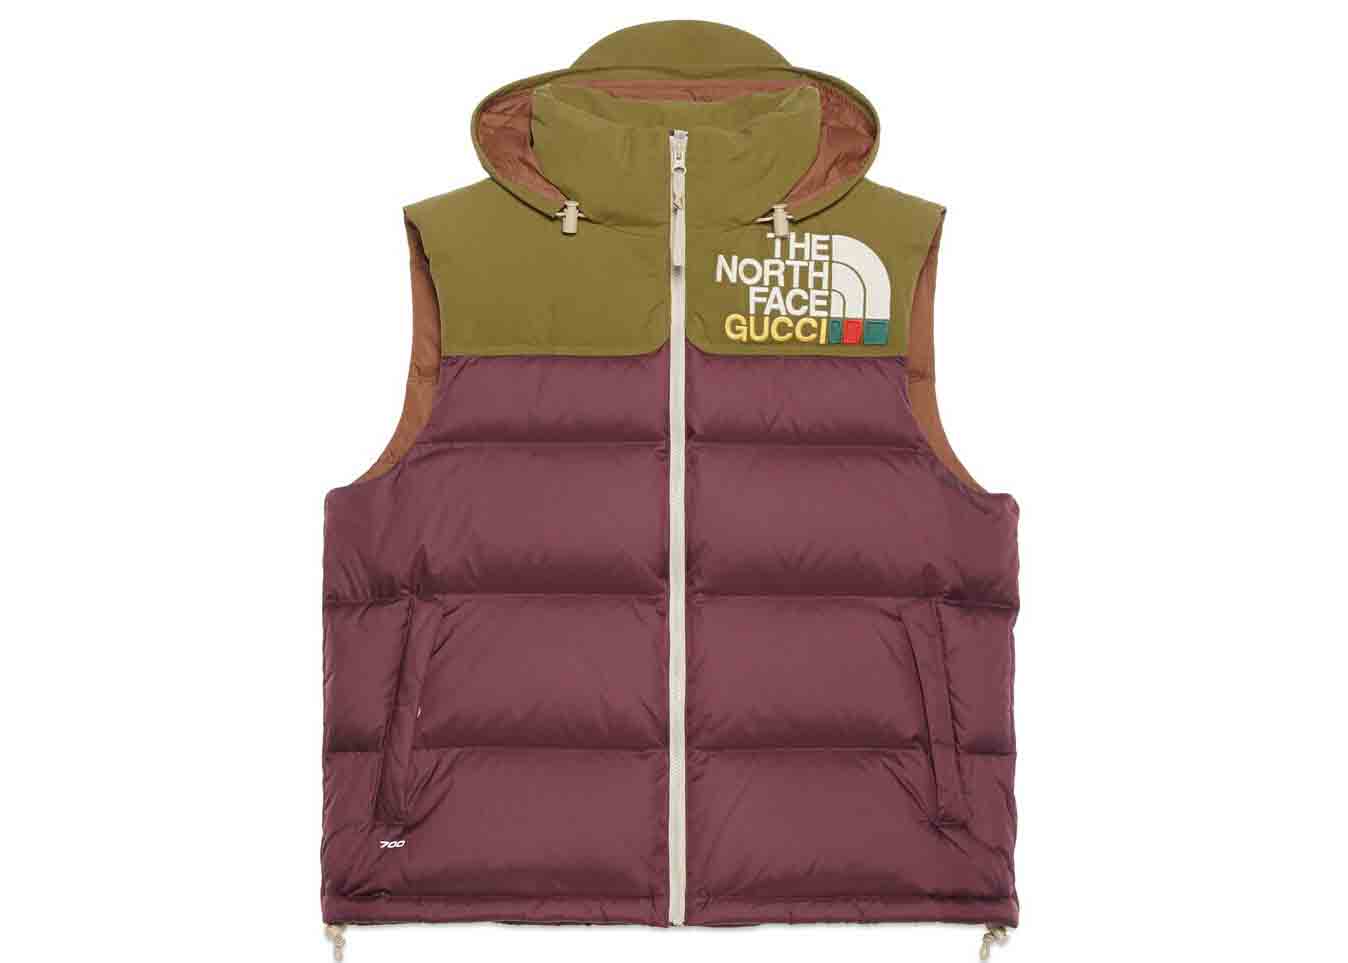 Gucci x The North Face Padded Vest Bordeaux/Green - FW21 - US